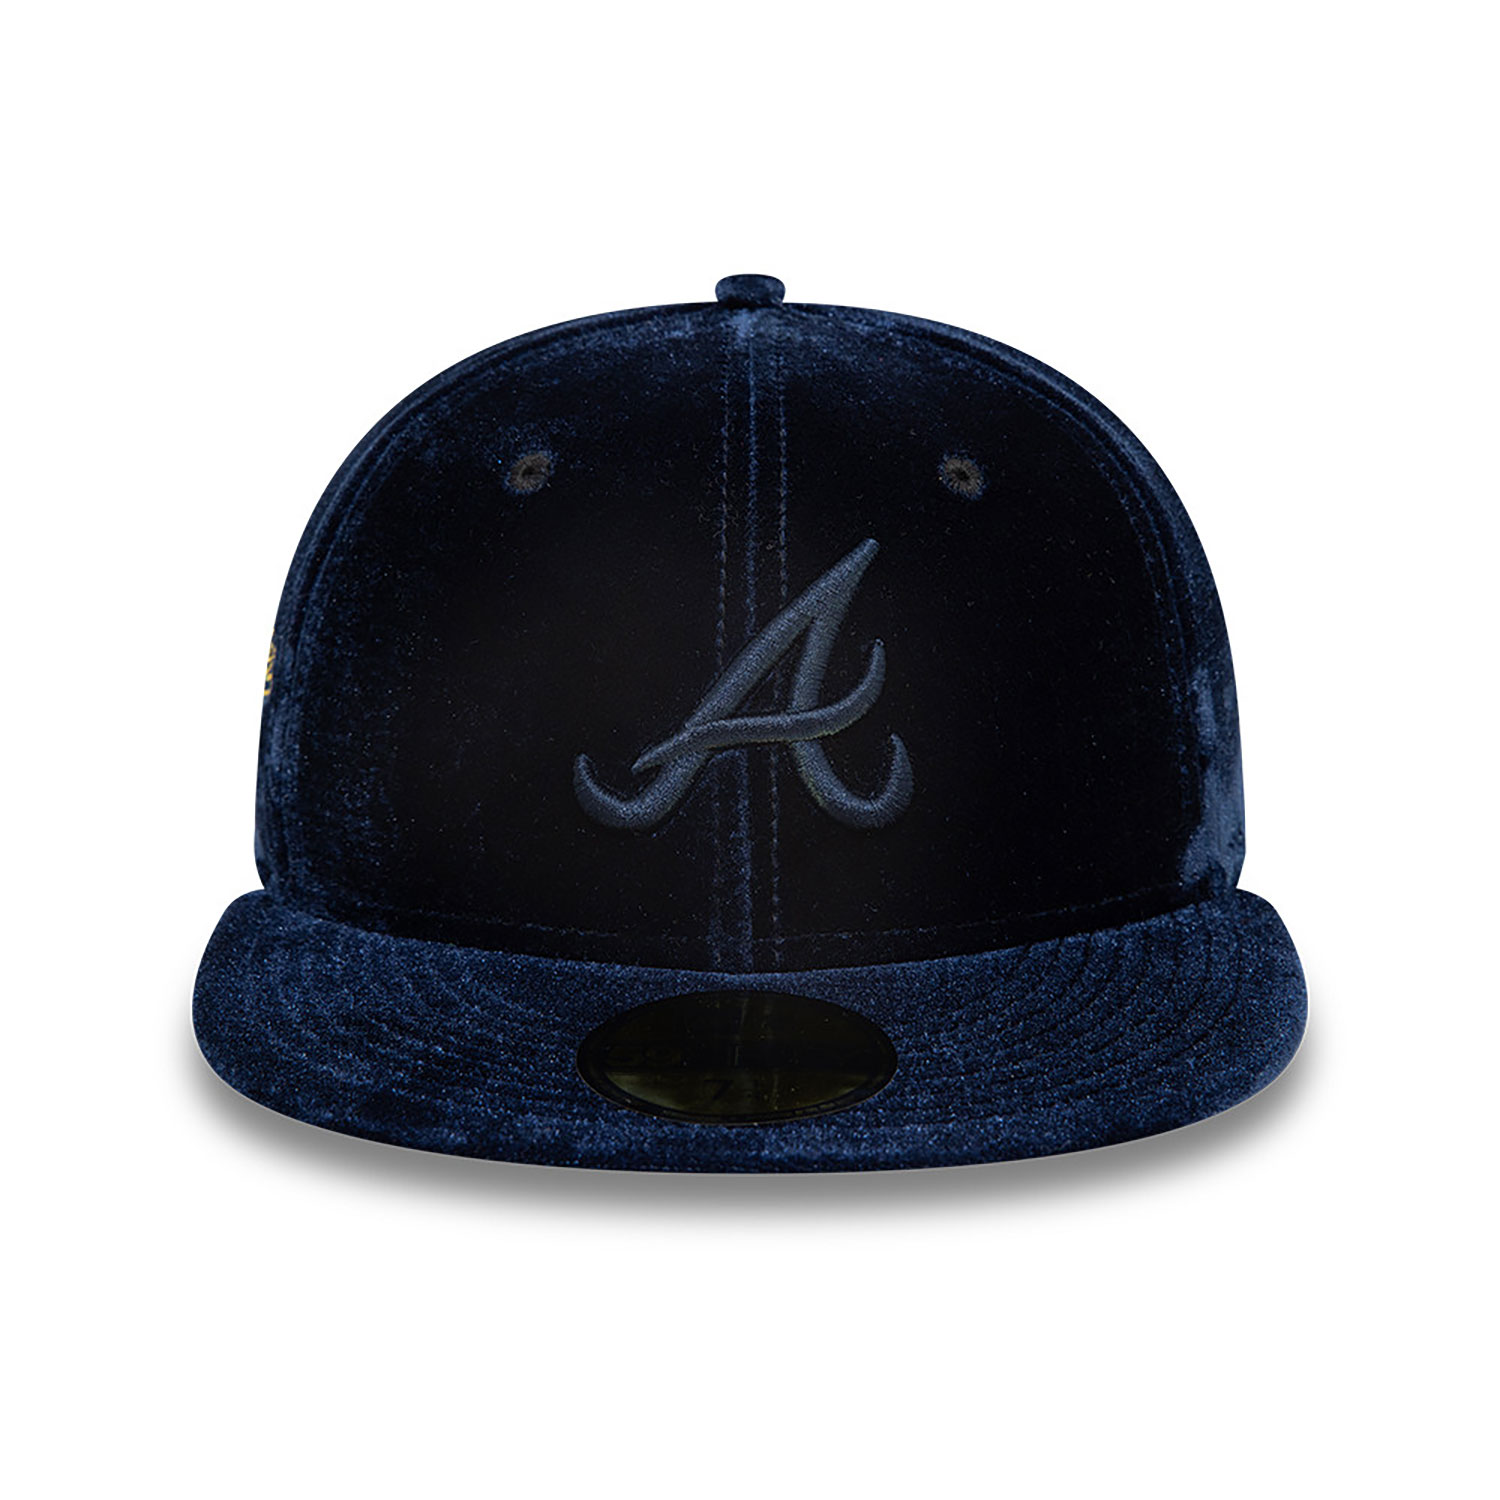 Atlanta Braves Midnight Velour Navy 59FIFTY Fitted Cap